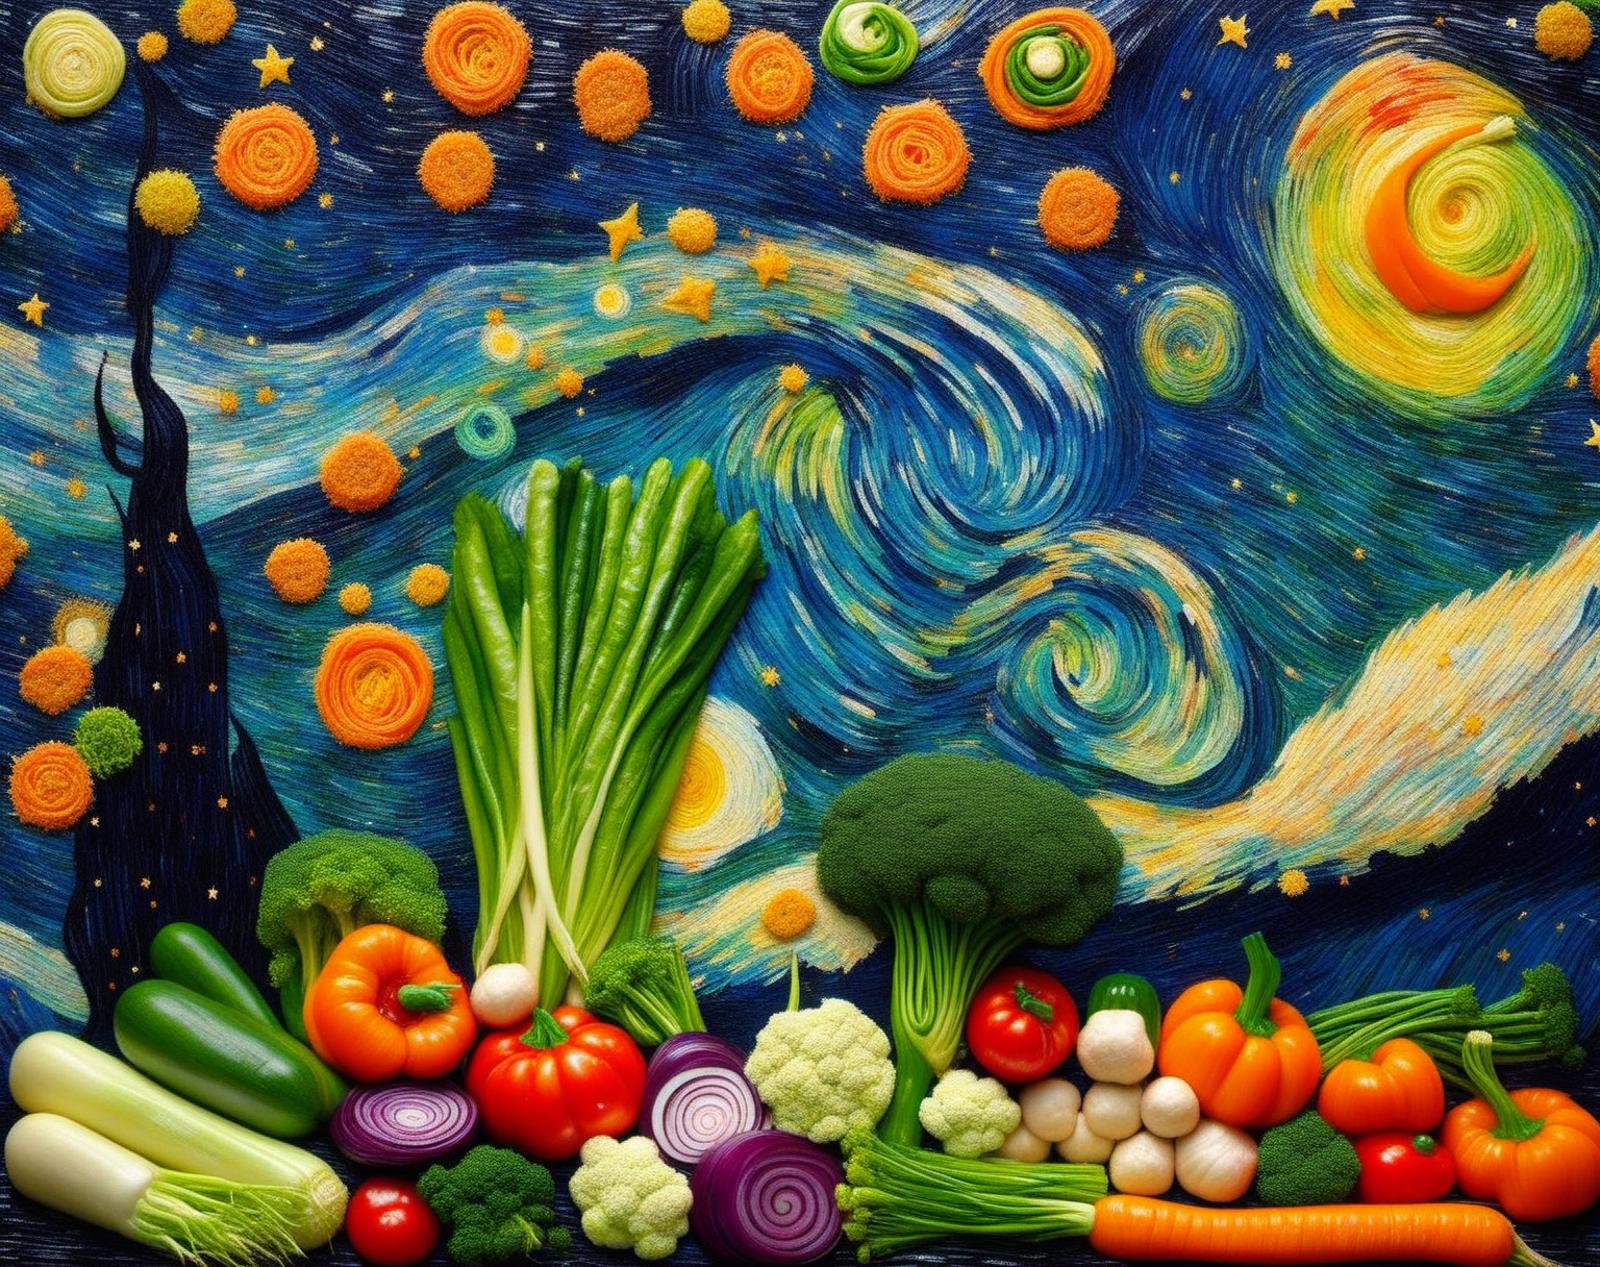 Artistic Display of Fresh Vegetables and Fruits Inspired by Van Gogh's Starry Night